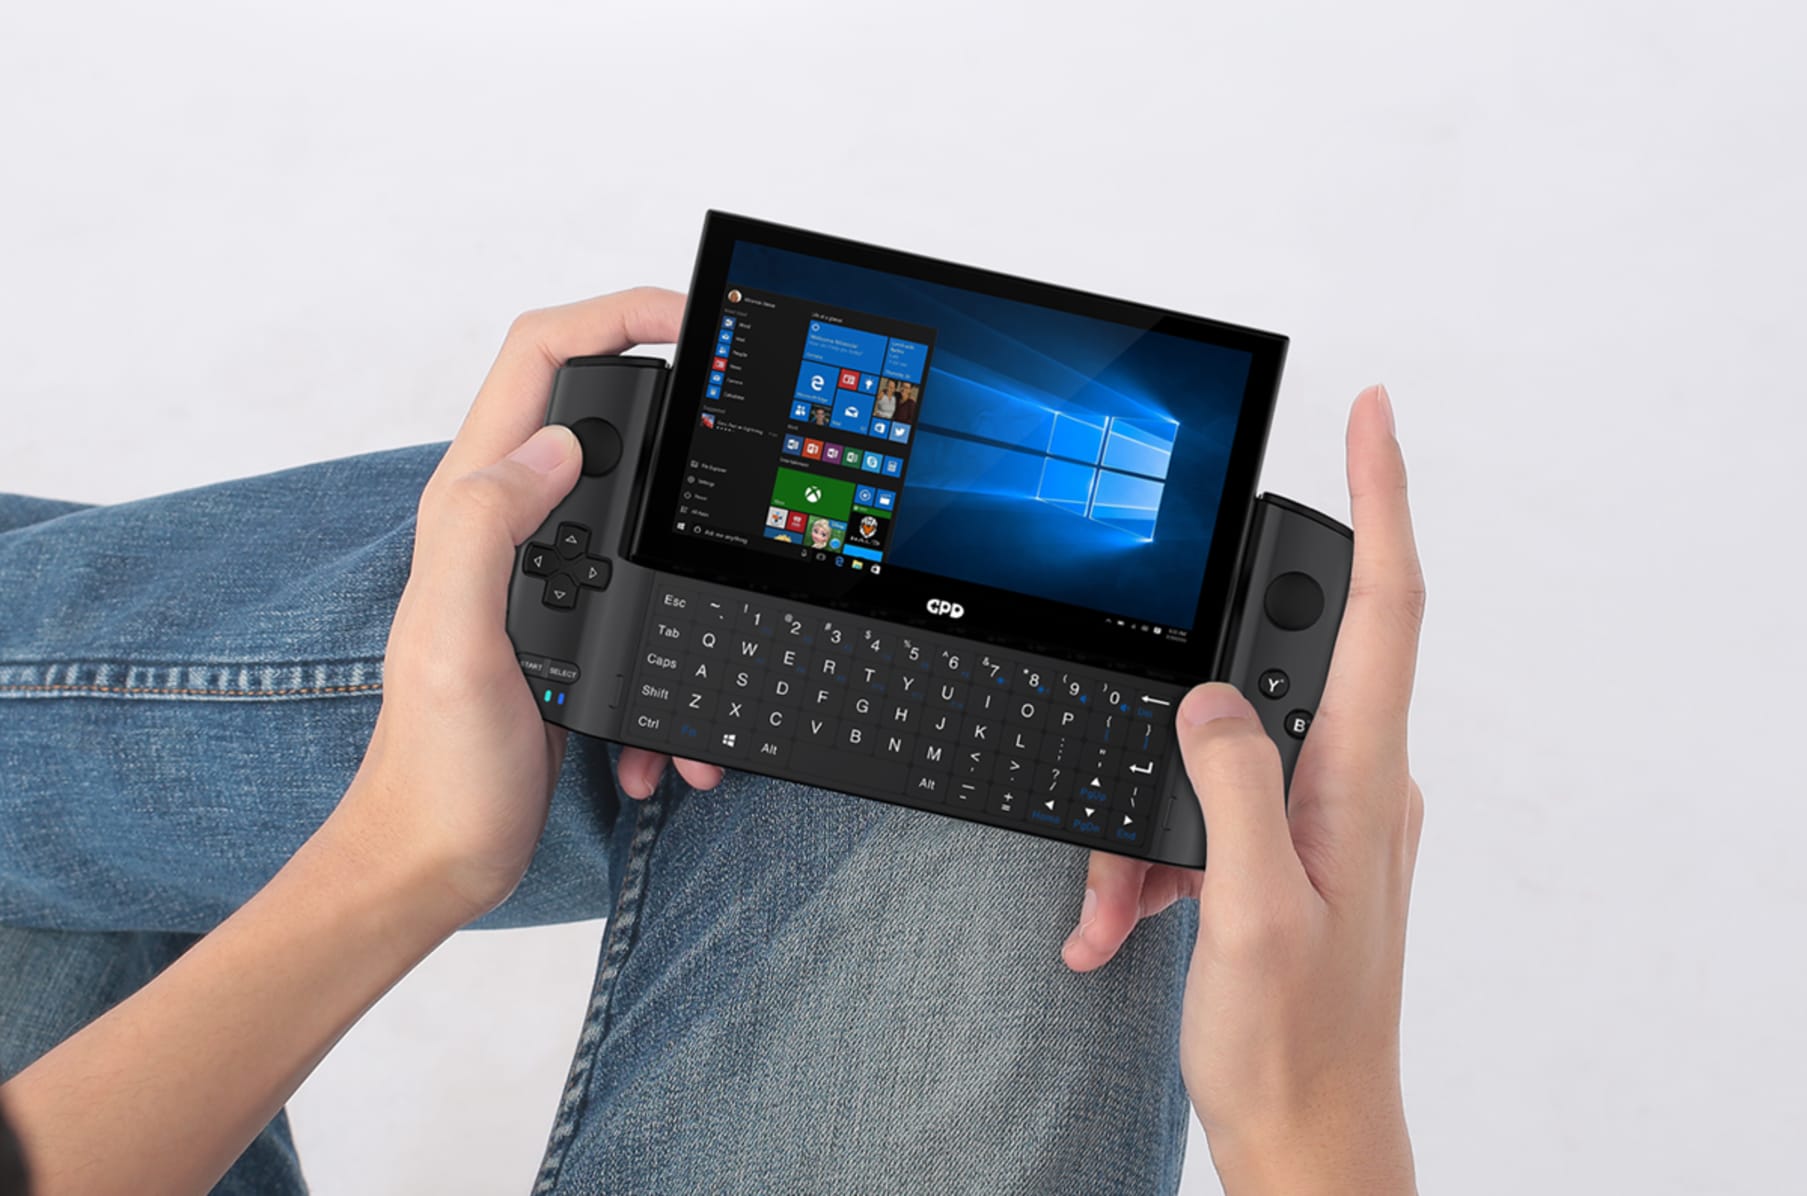 GPD WIN3:The world's 1st handheld AAA game console | Indiegogo